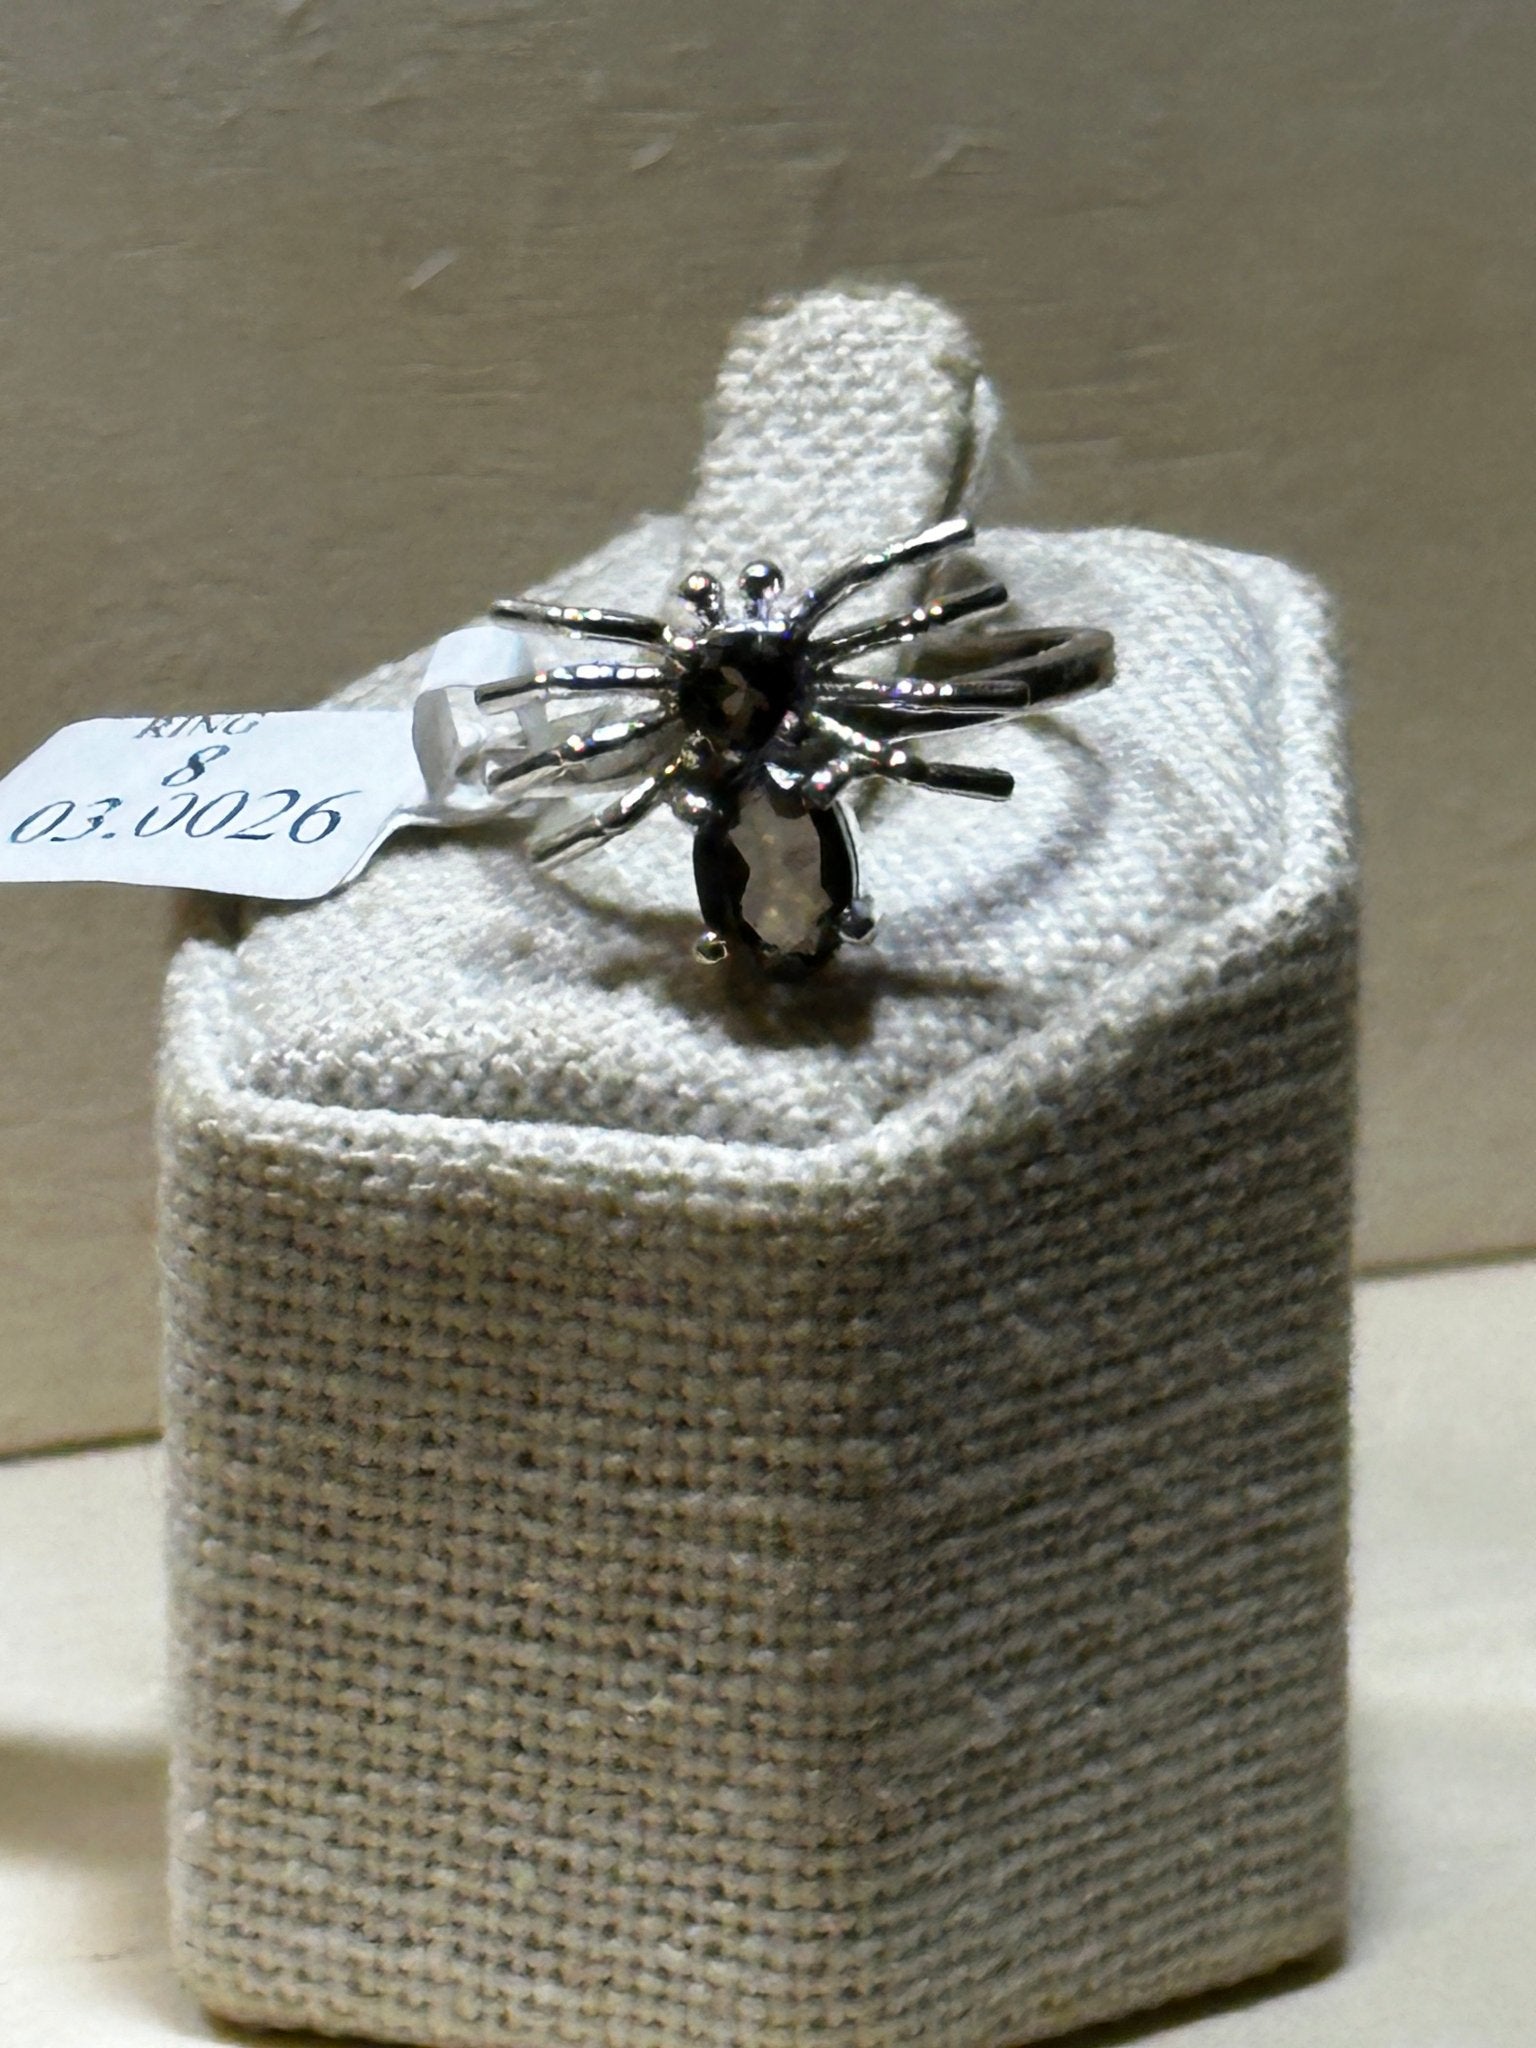 Smoky Quartz Spider Ring Size 8 (03.0026) - Sacred Crystals Rings